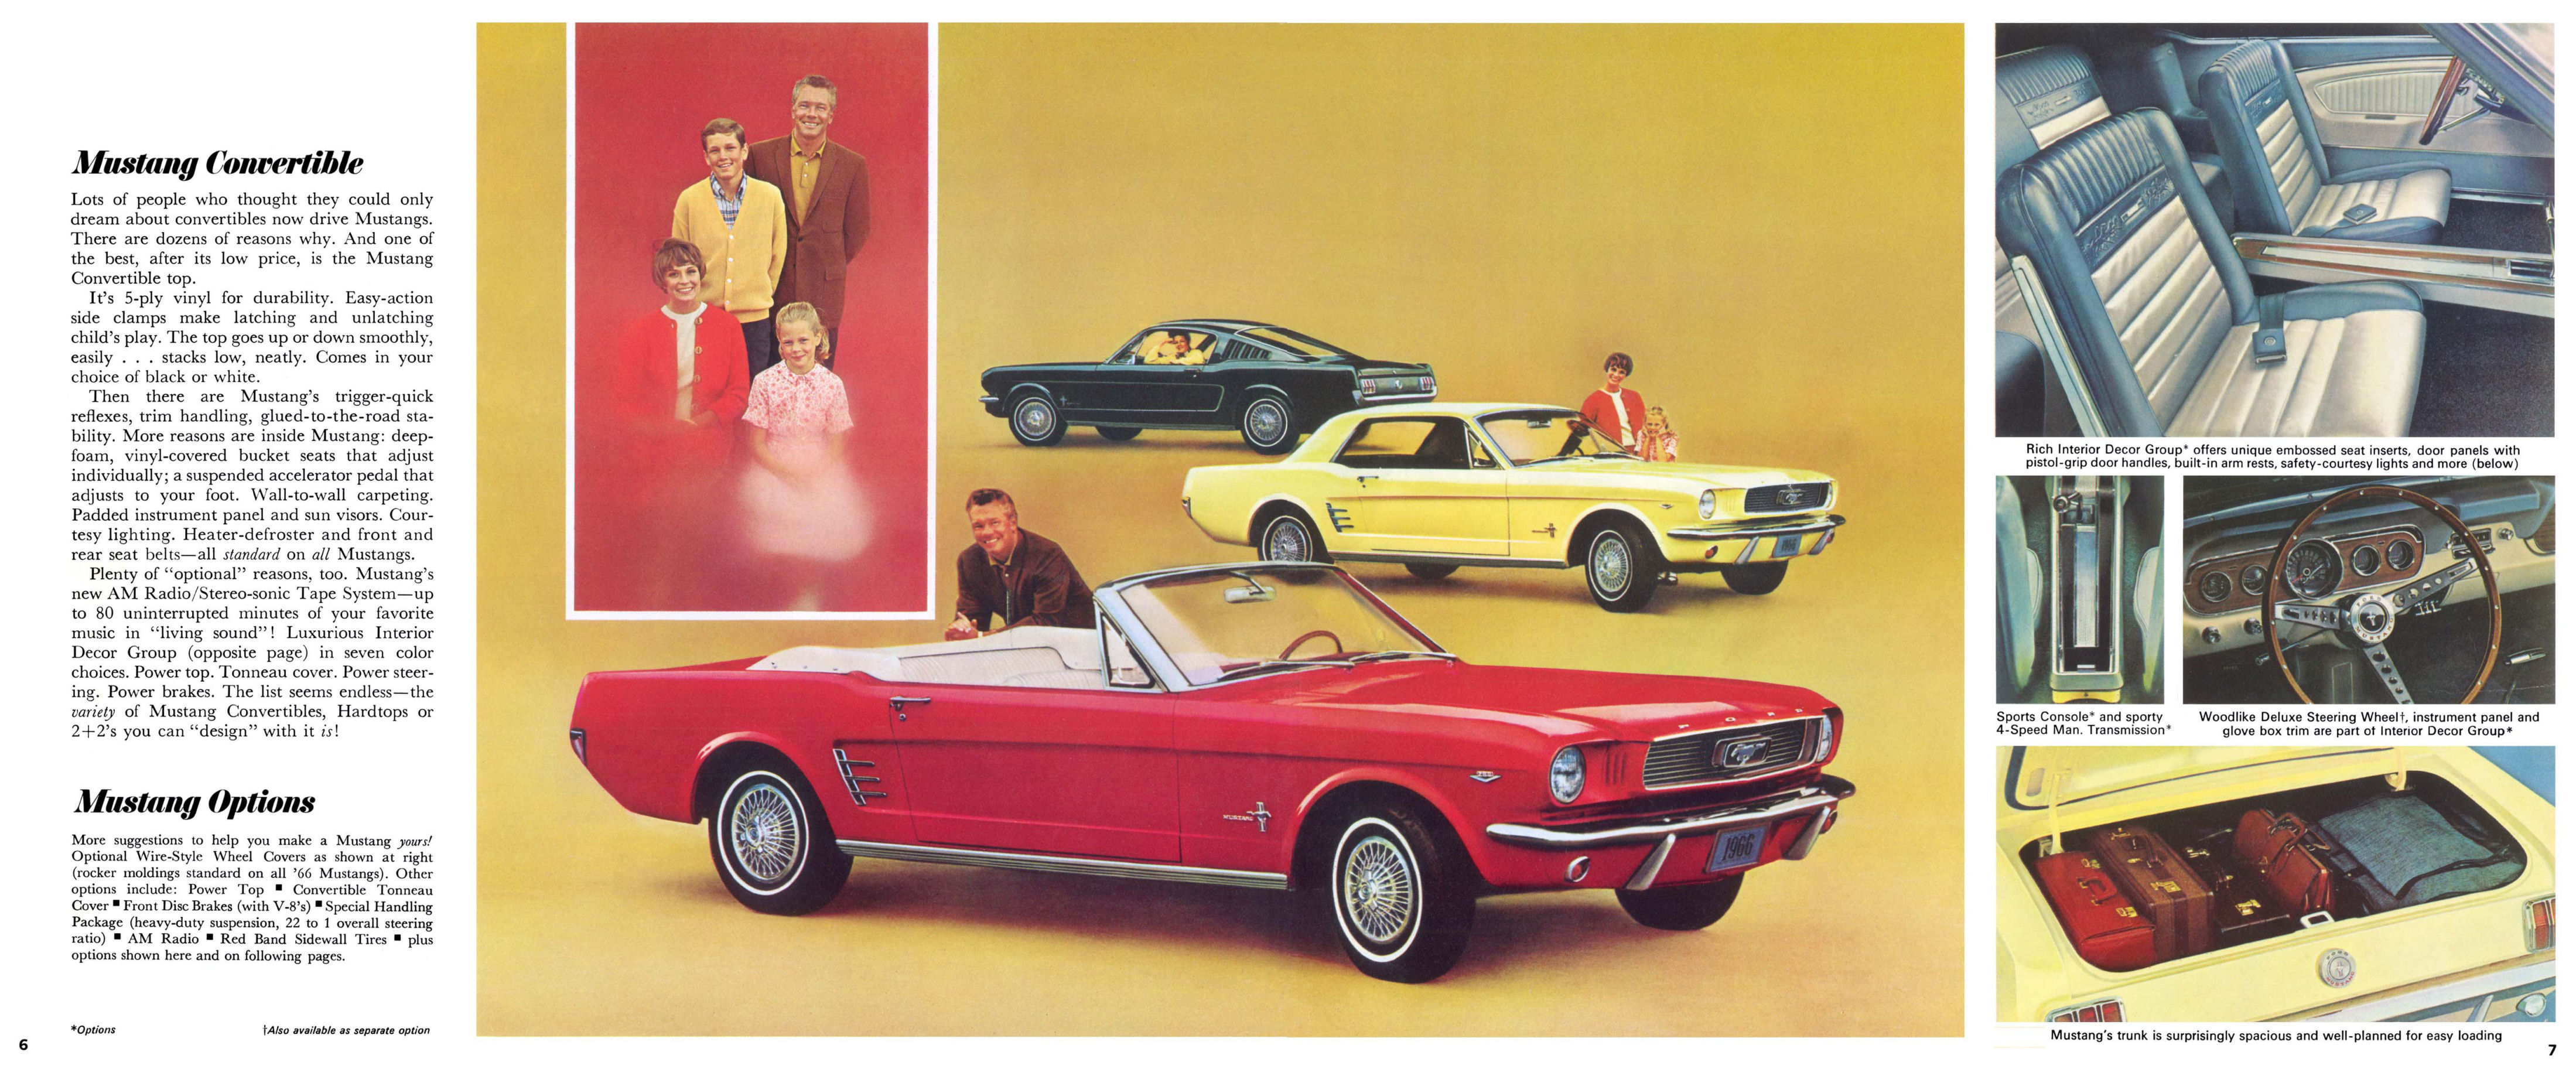 1966_Ford_Mustang-06-07